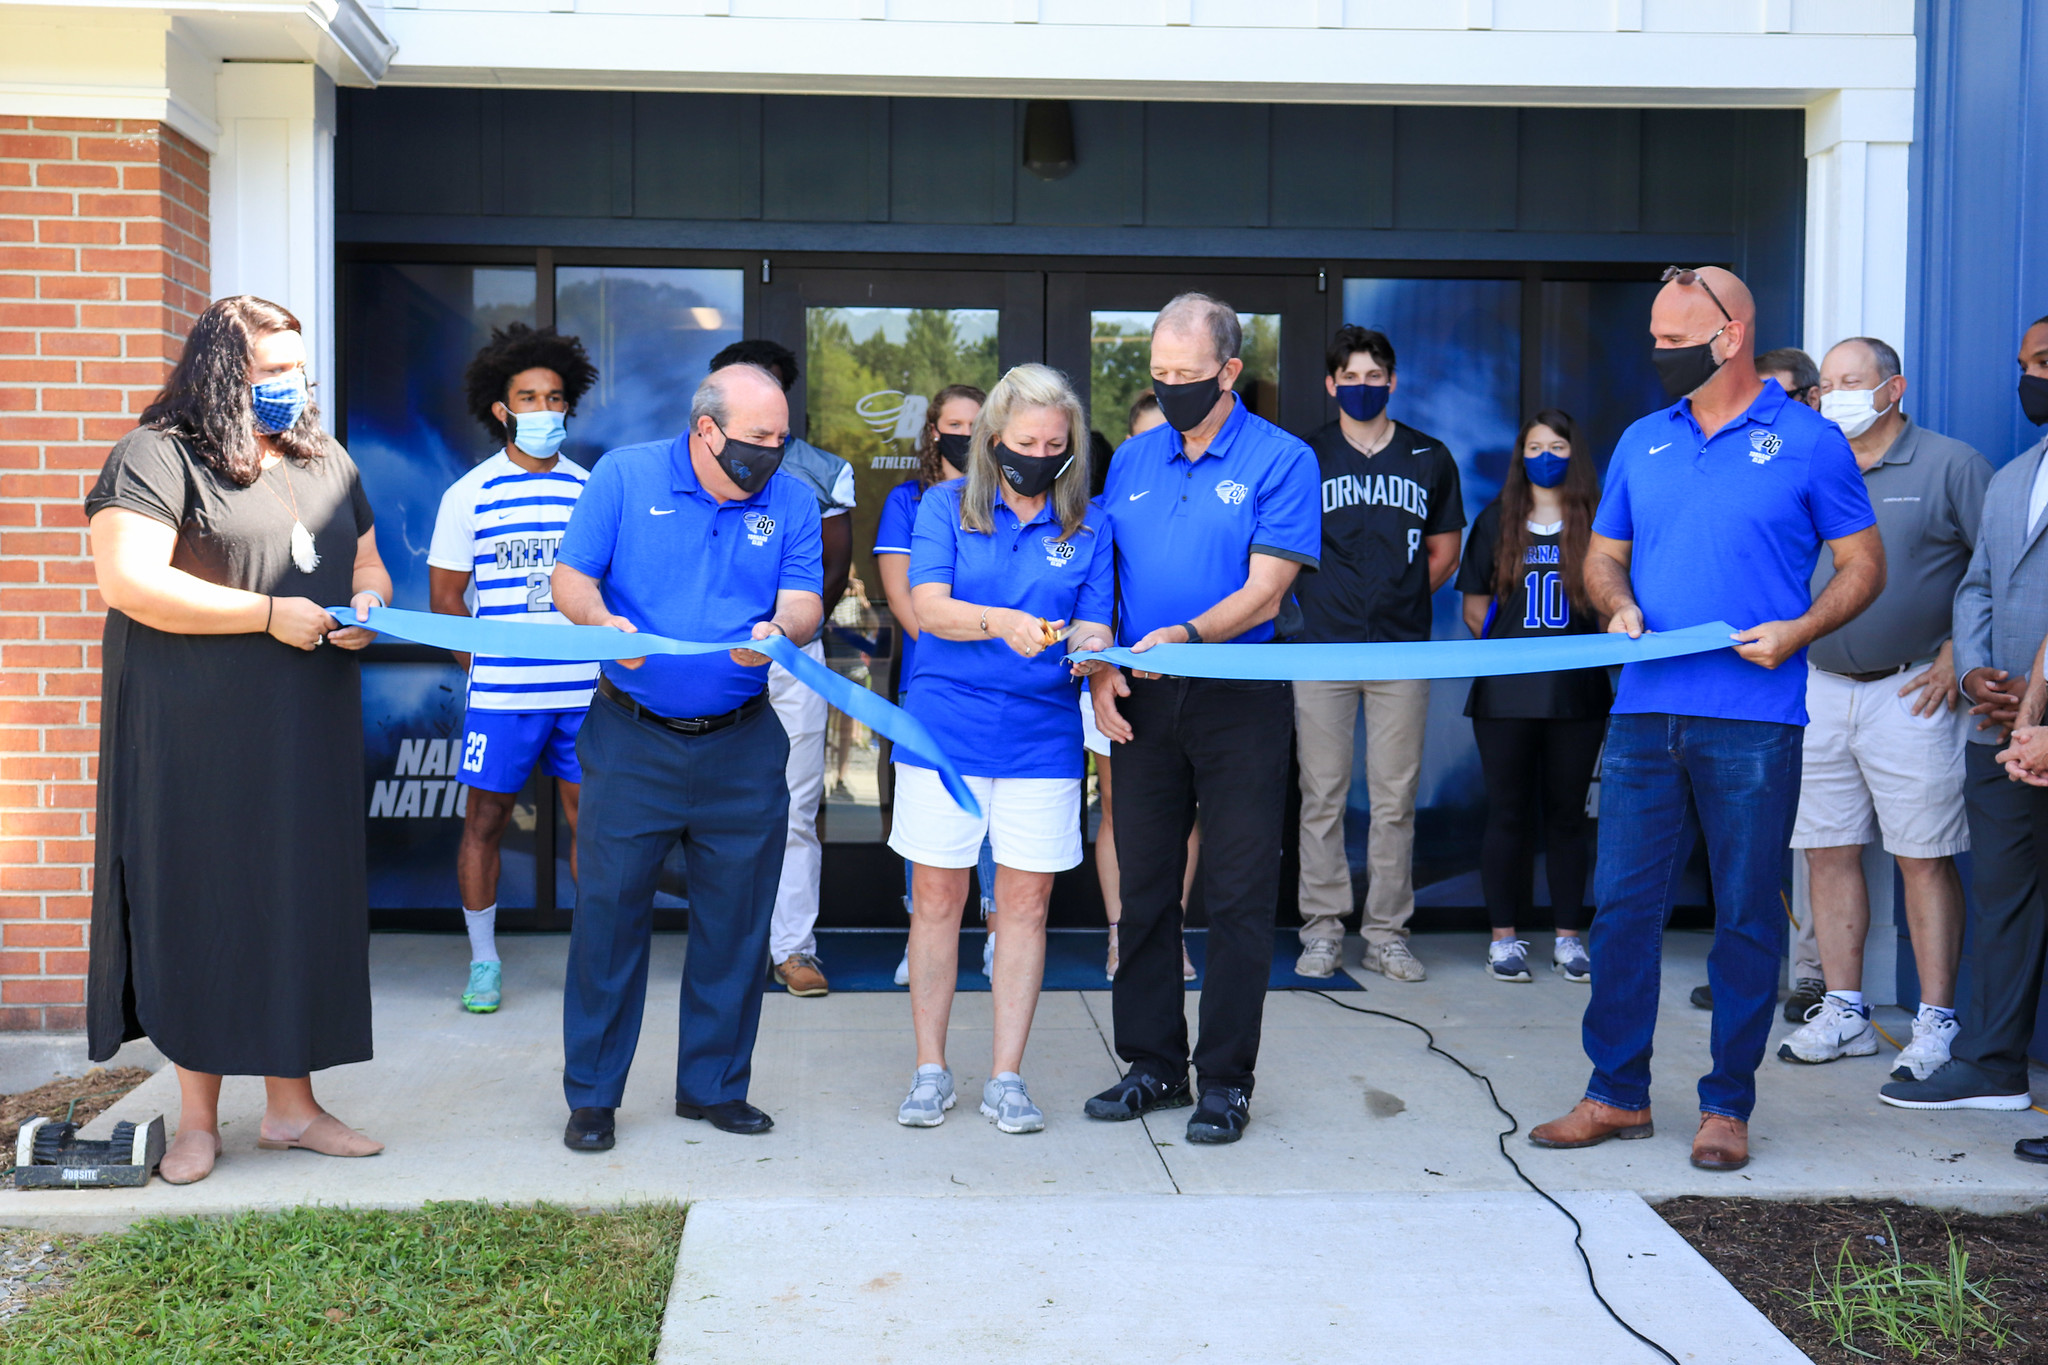 Brevard College President David C. Joyce and Lynne Joyce cut the ceremonial ribbon joined by Vice President for Finance & Operations/CFO and Head Women’s Soccer Coach Juan Mascaro, Director of Athletics and Executive Director of Strategy & Operations Myranda Nash, Director of Facilities Burke Ulrey and student-athletes from six BC sports.